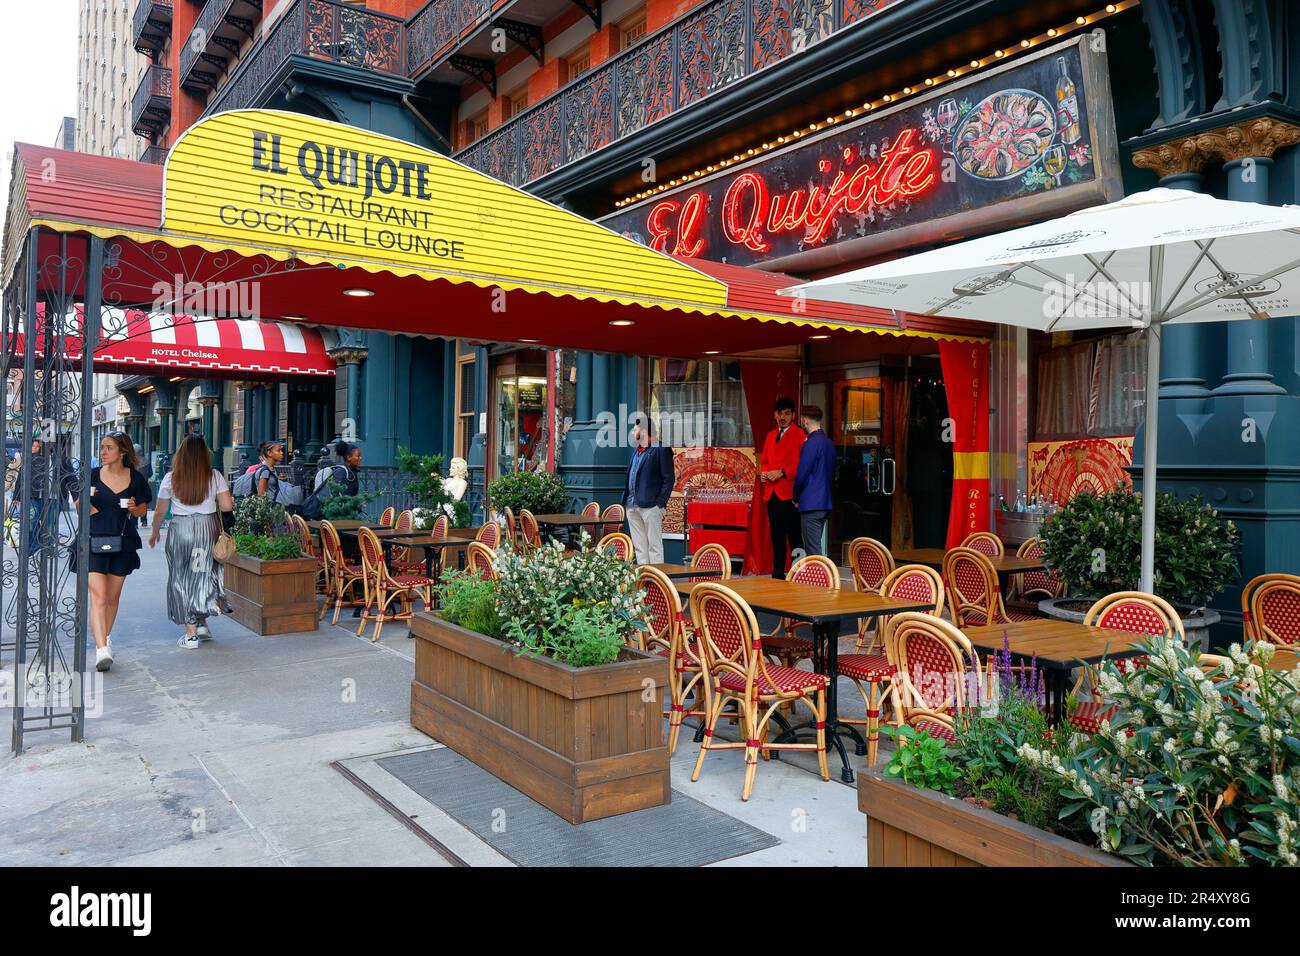 El Quijote, 226 W 23rd St, New York, NYC storefront photo of a Spanish restaurant at Hotel Chelsea in Manhattan's Chelsea neighborhood. Stock Photo